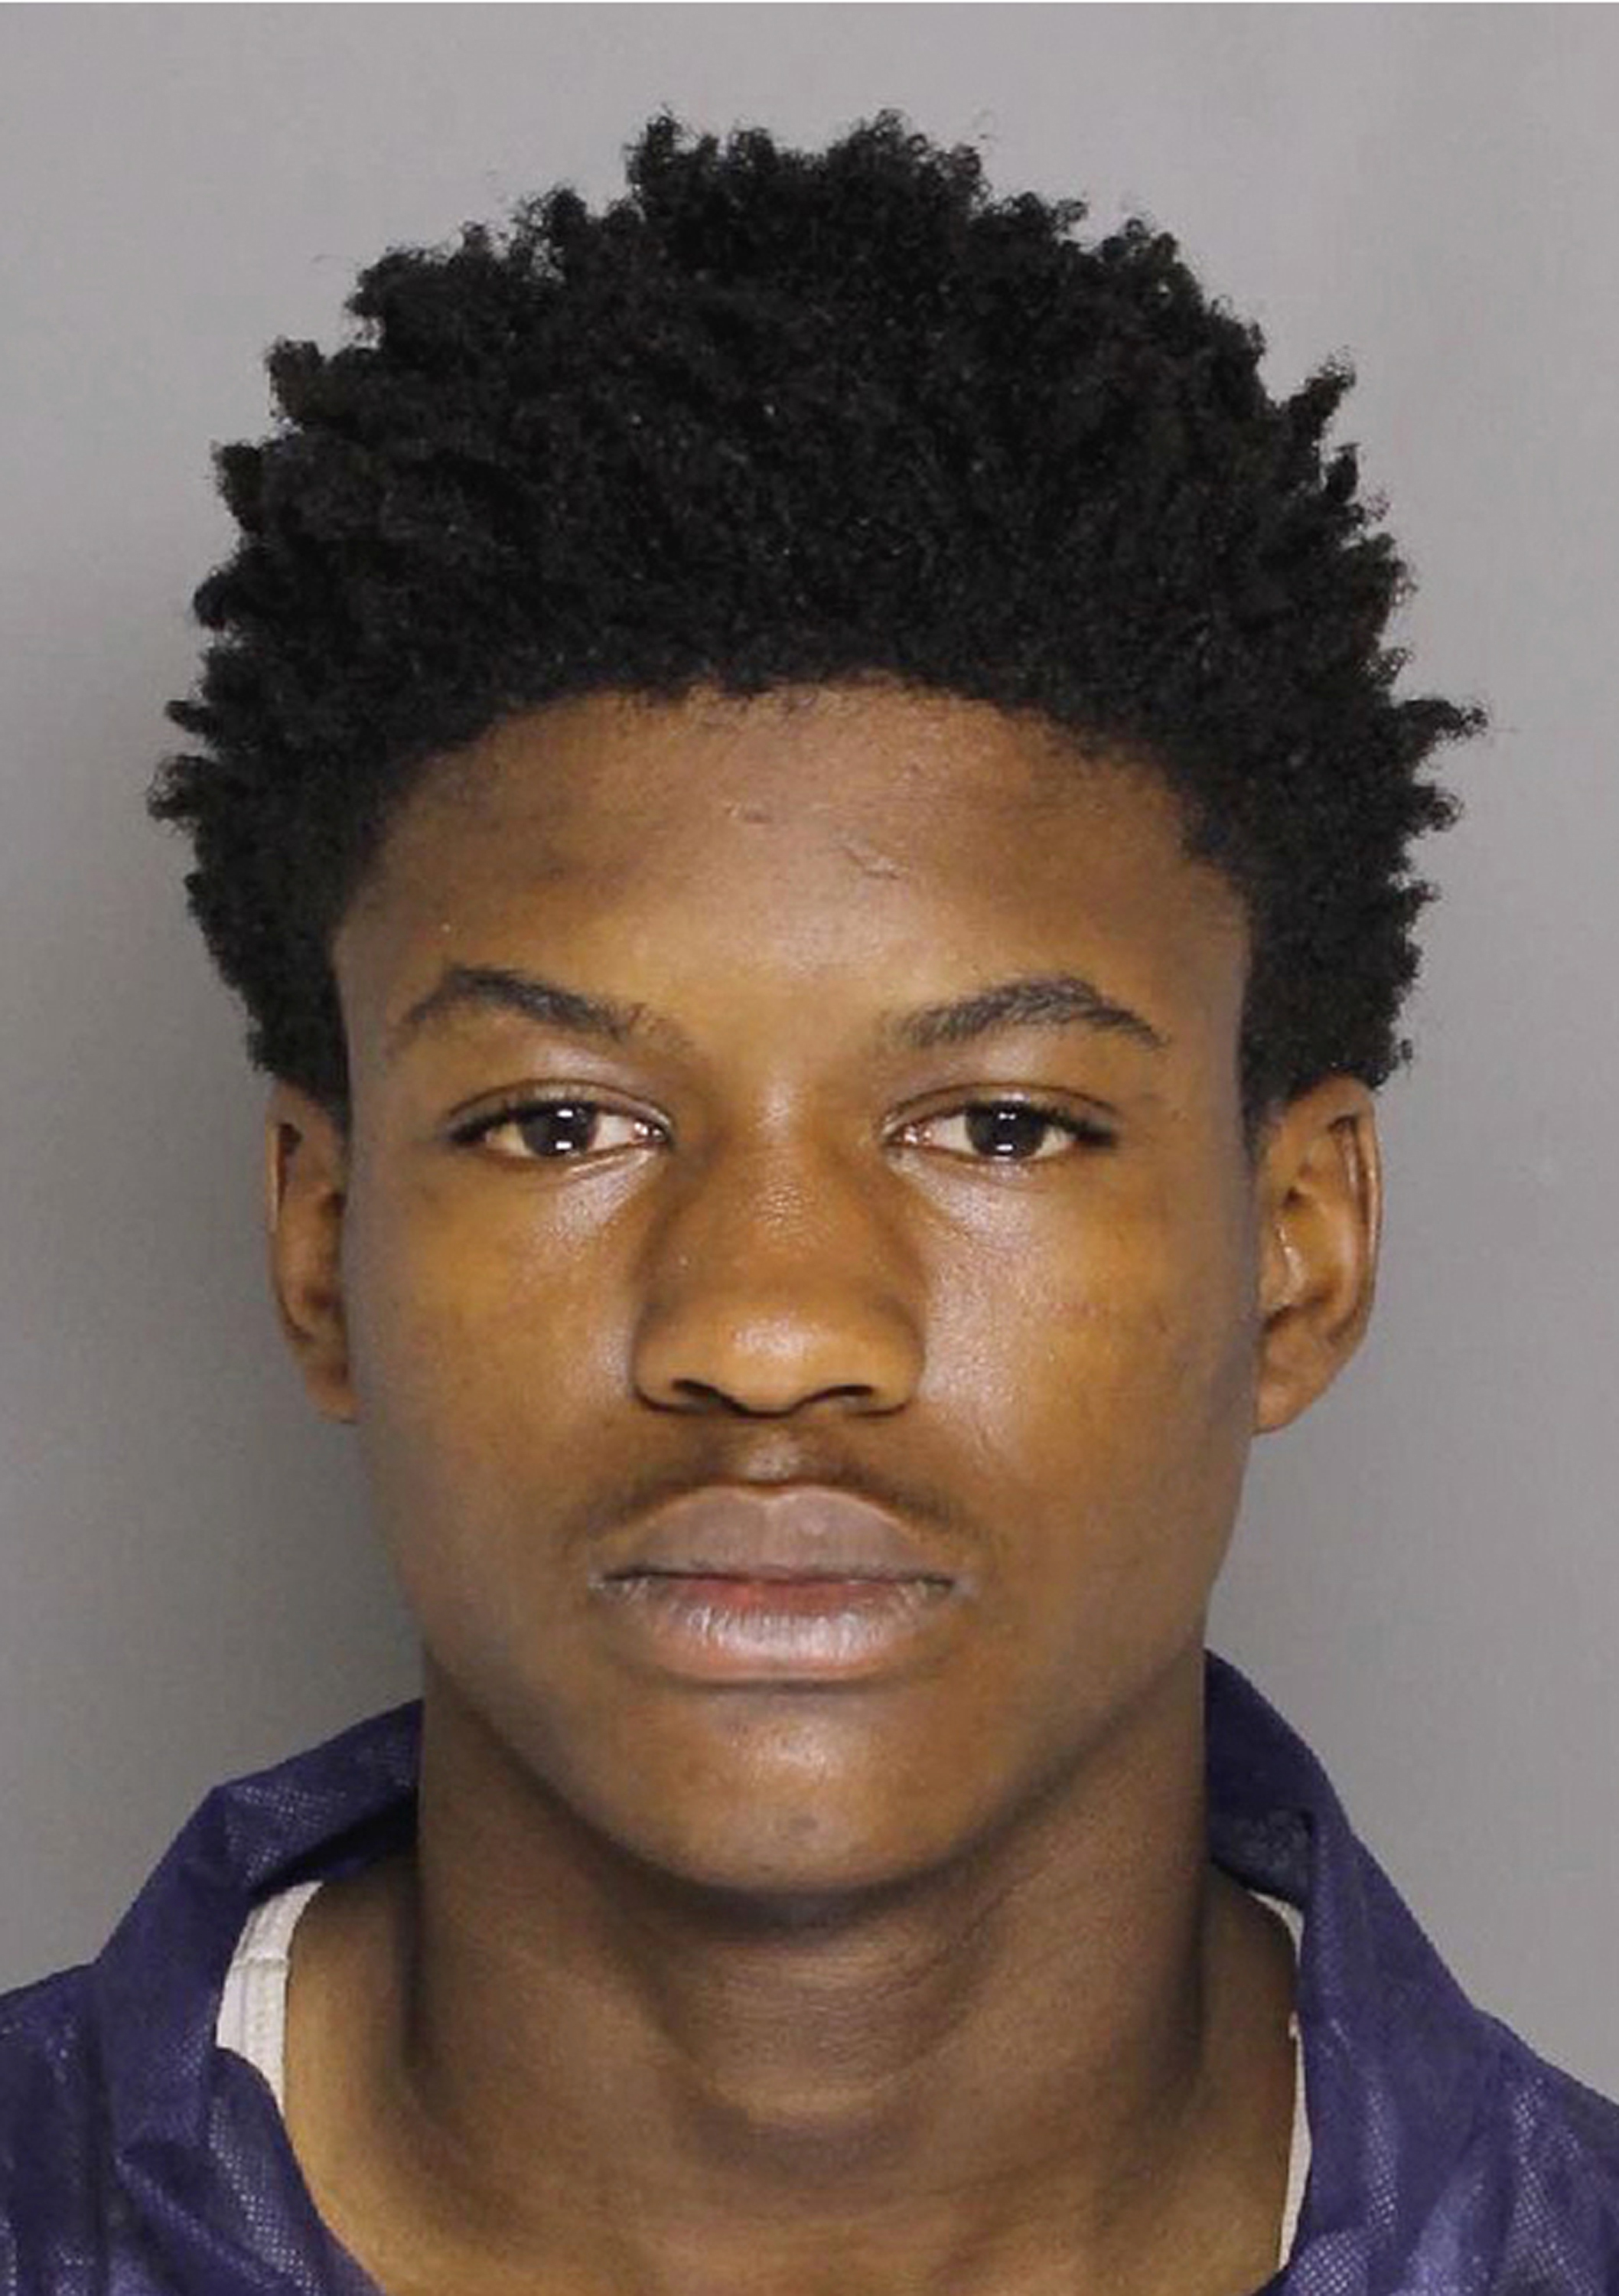 Baltimore teen found guilty of slaying police officer